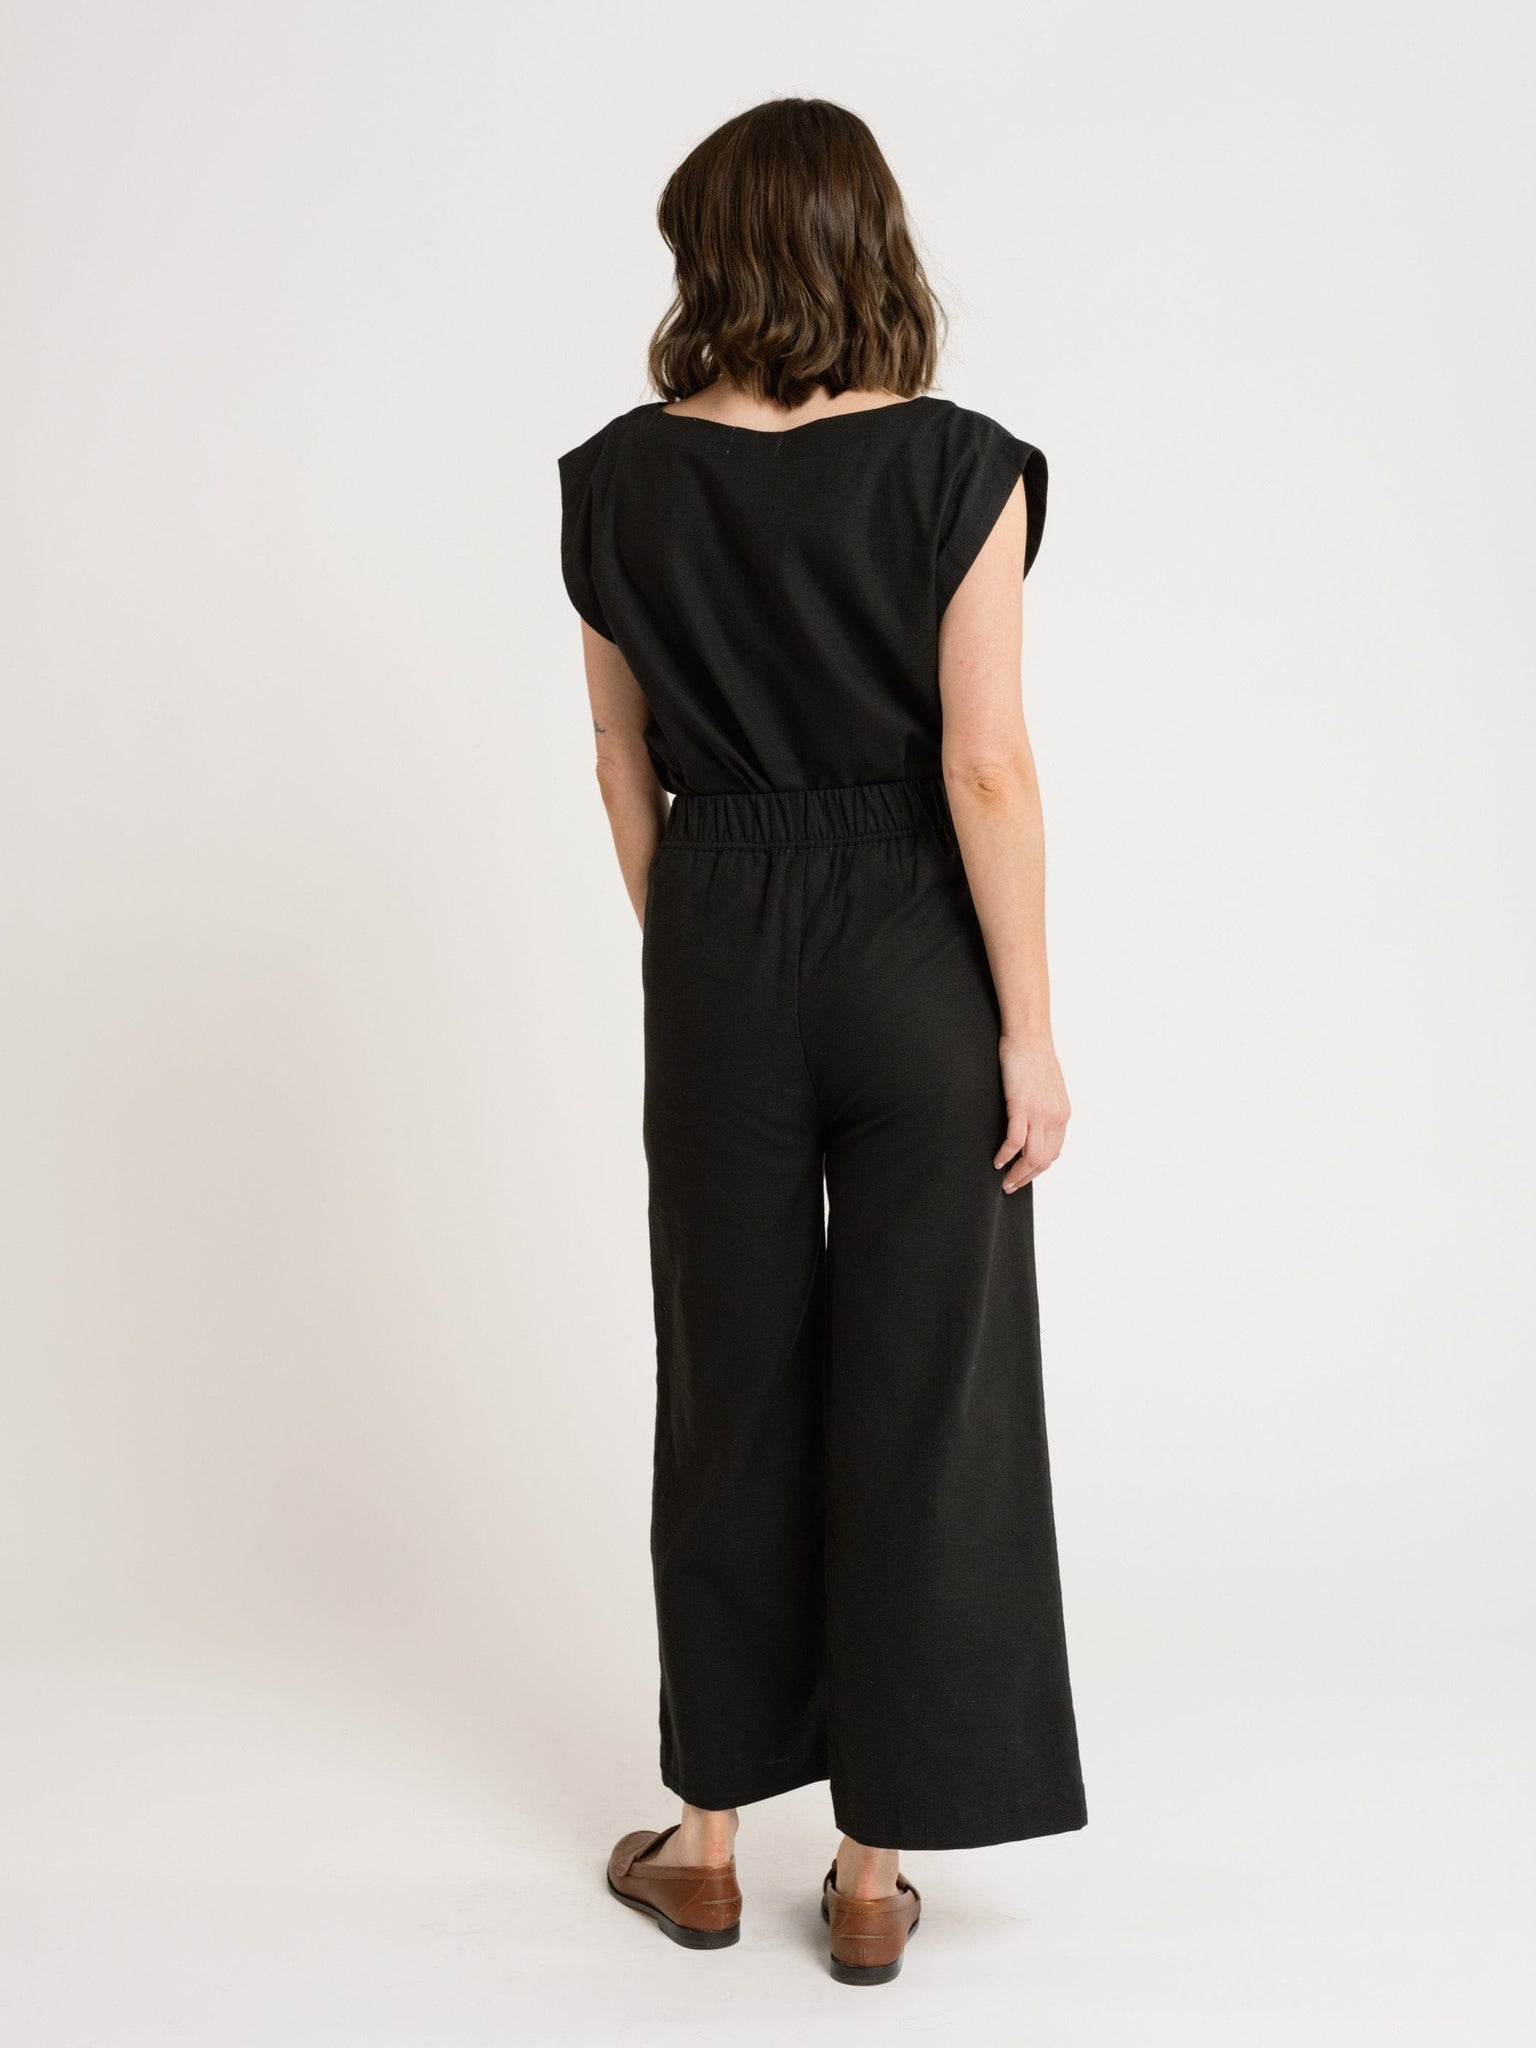 The back view of a woman wearing an Everyday Top - Black.